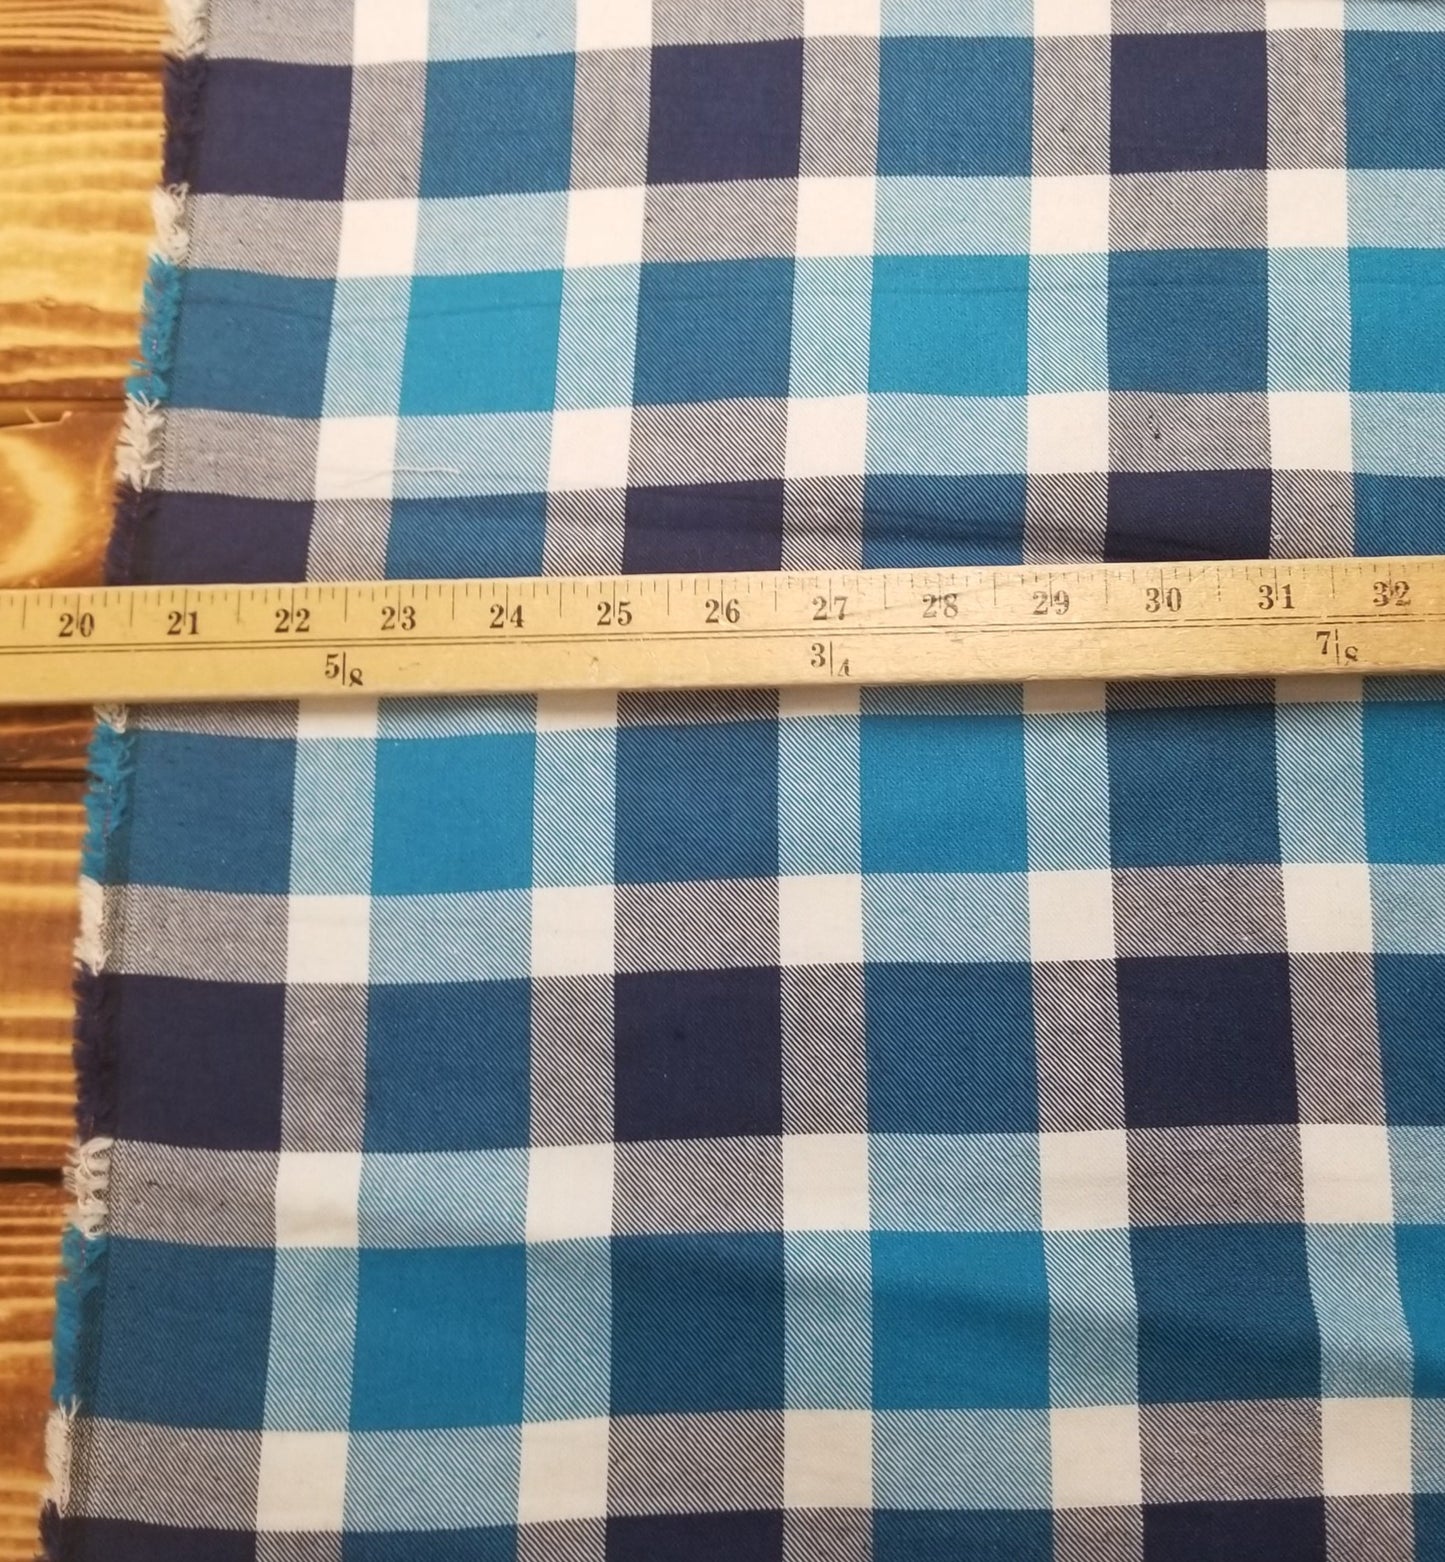 Designer Deadstock Yarn Dyed Single Brushed Flannel Glendora Blue Check Plaid Shirting Cotton Woven-Sold by the yard